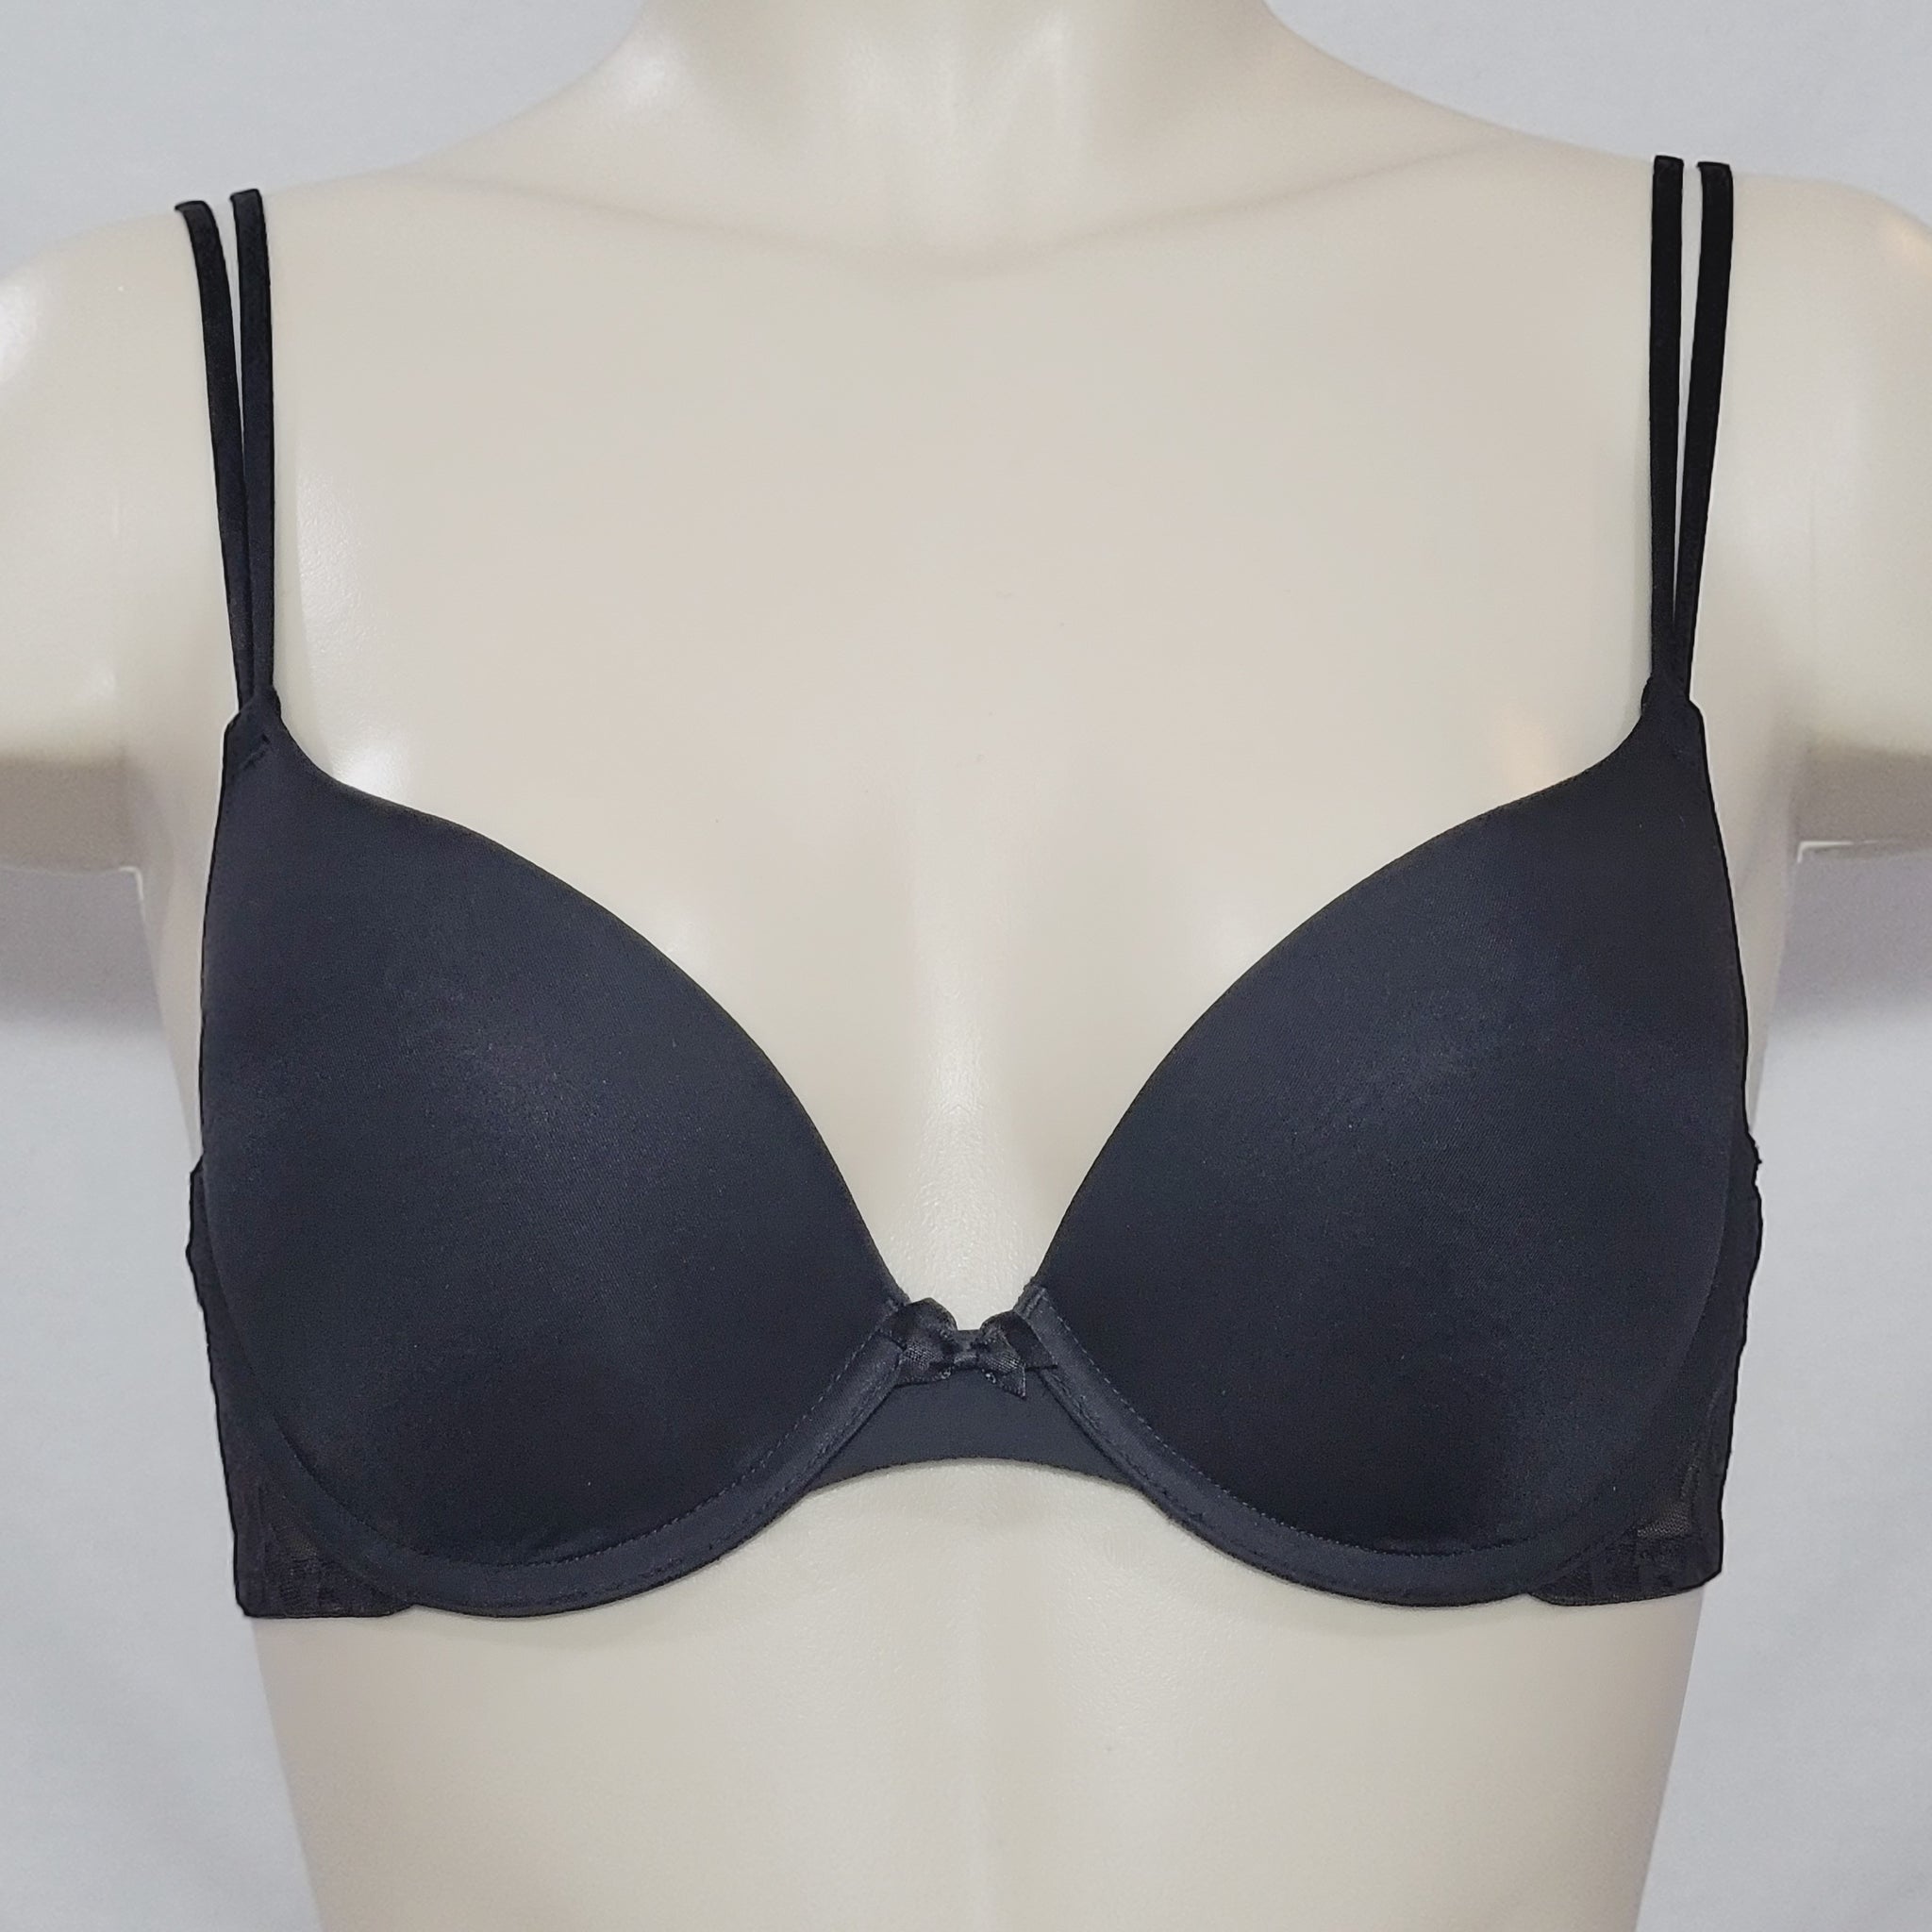 DKNY Super Glam Add 2 Cup Sizes Push Up Bra 458111 in Black